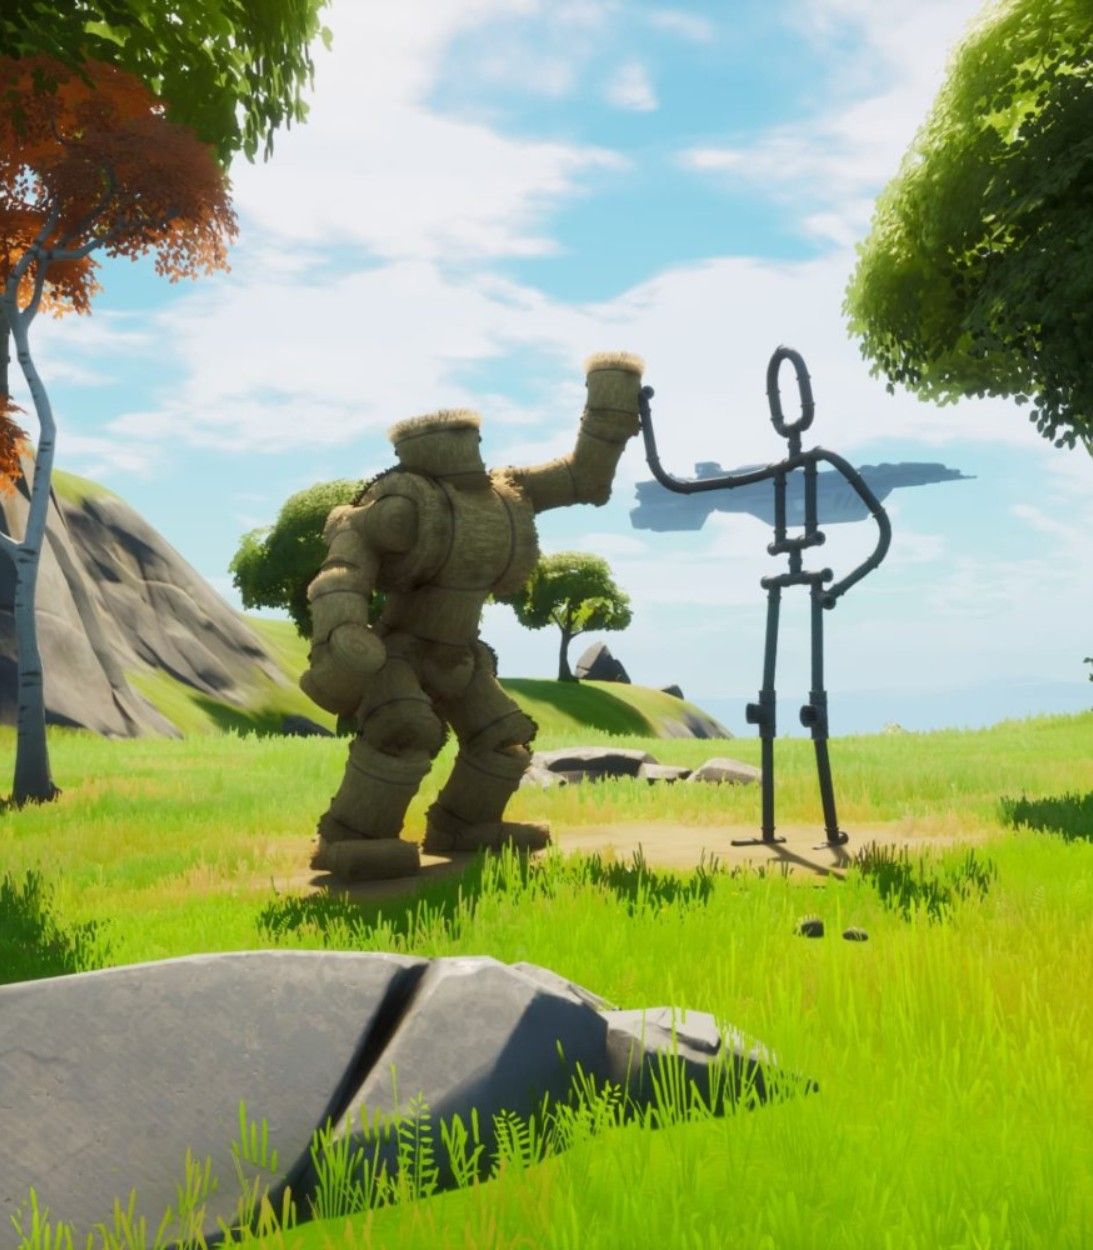 Players will find the Friendship Monument Between Sweaty Sands and Coral Castle in Fortnite Season 4